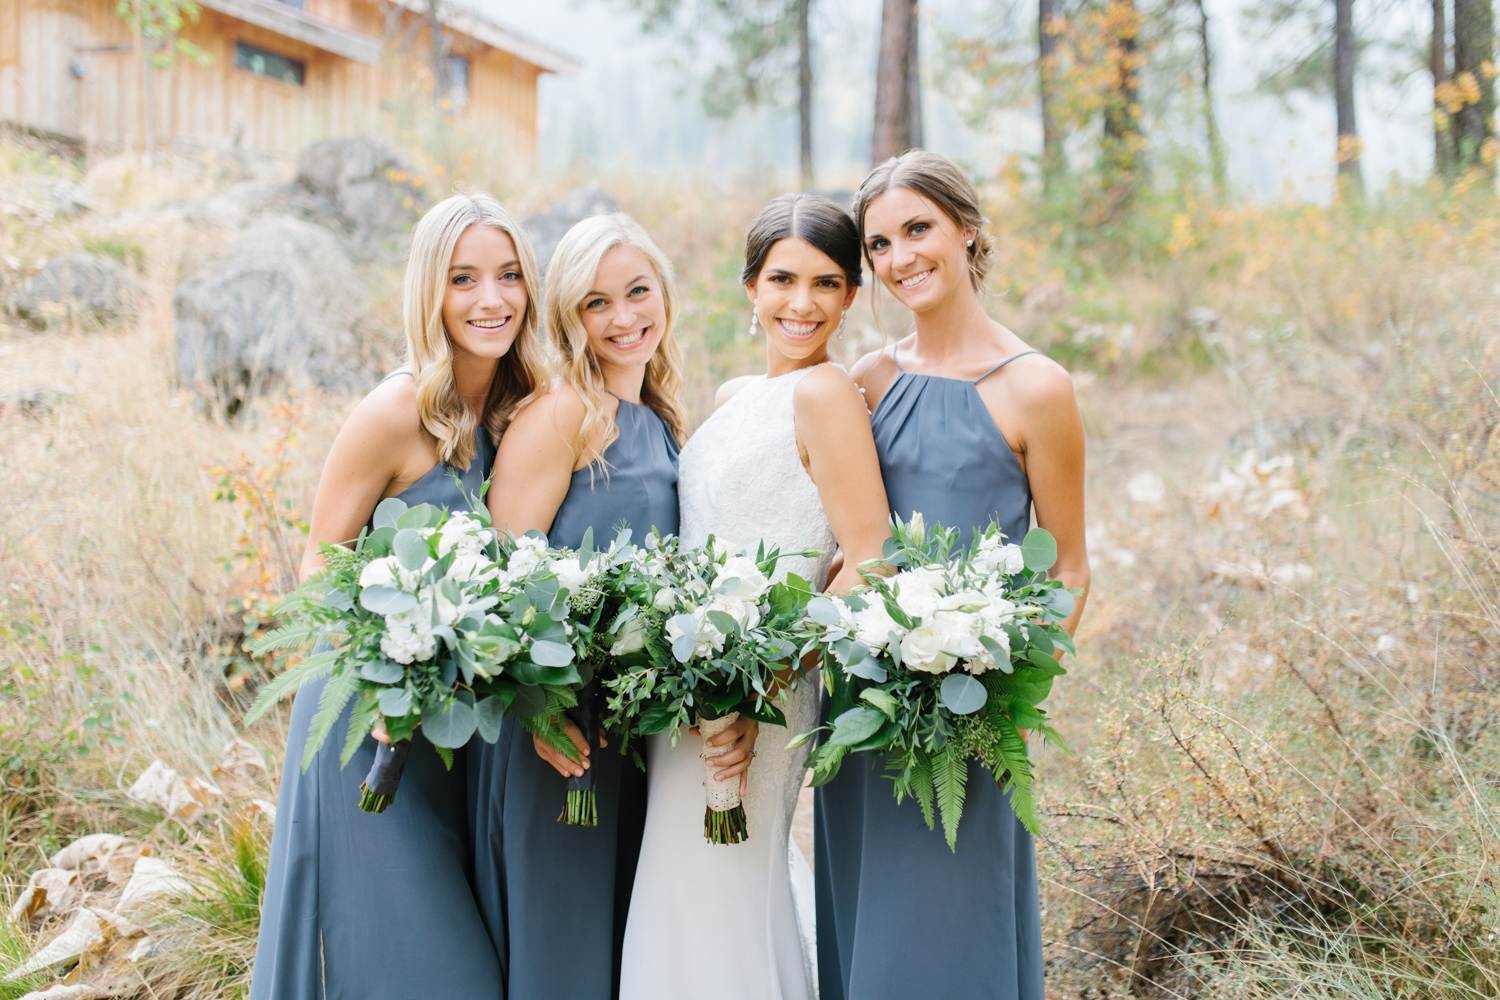 Grey and White Wedding in the Mountains of Leavenworth, Washington | Sleeping Lady | Classic and Timeless Wedding | VSCO | Bride with Bridesmaids | Grey Bridesmaids Dresses.jpg-2219.jpg